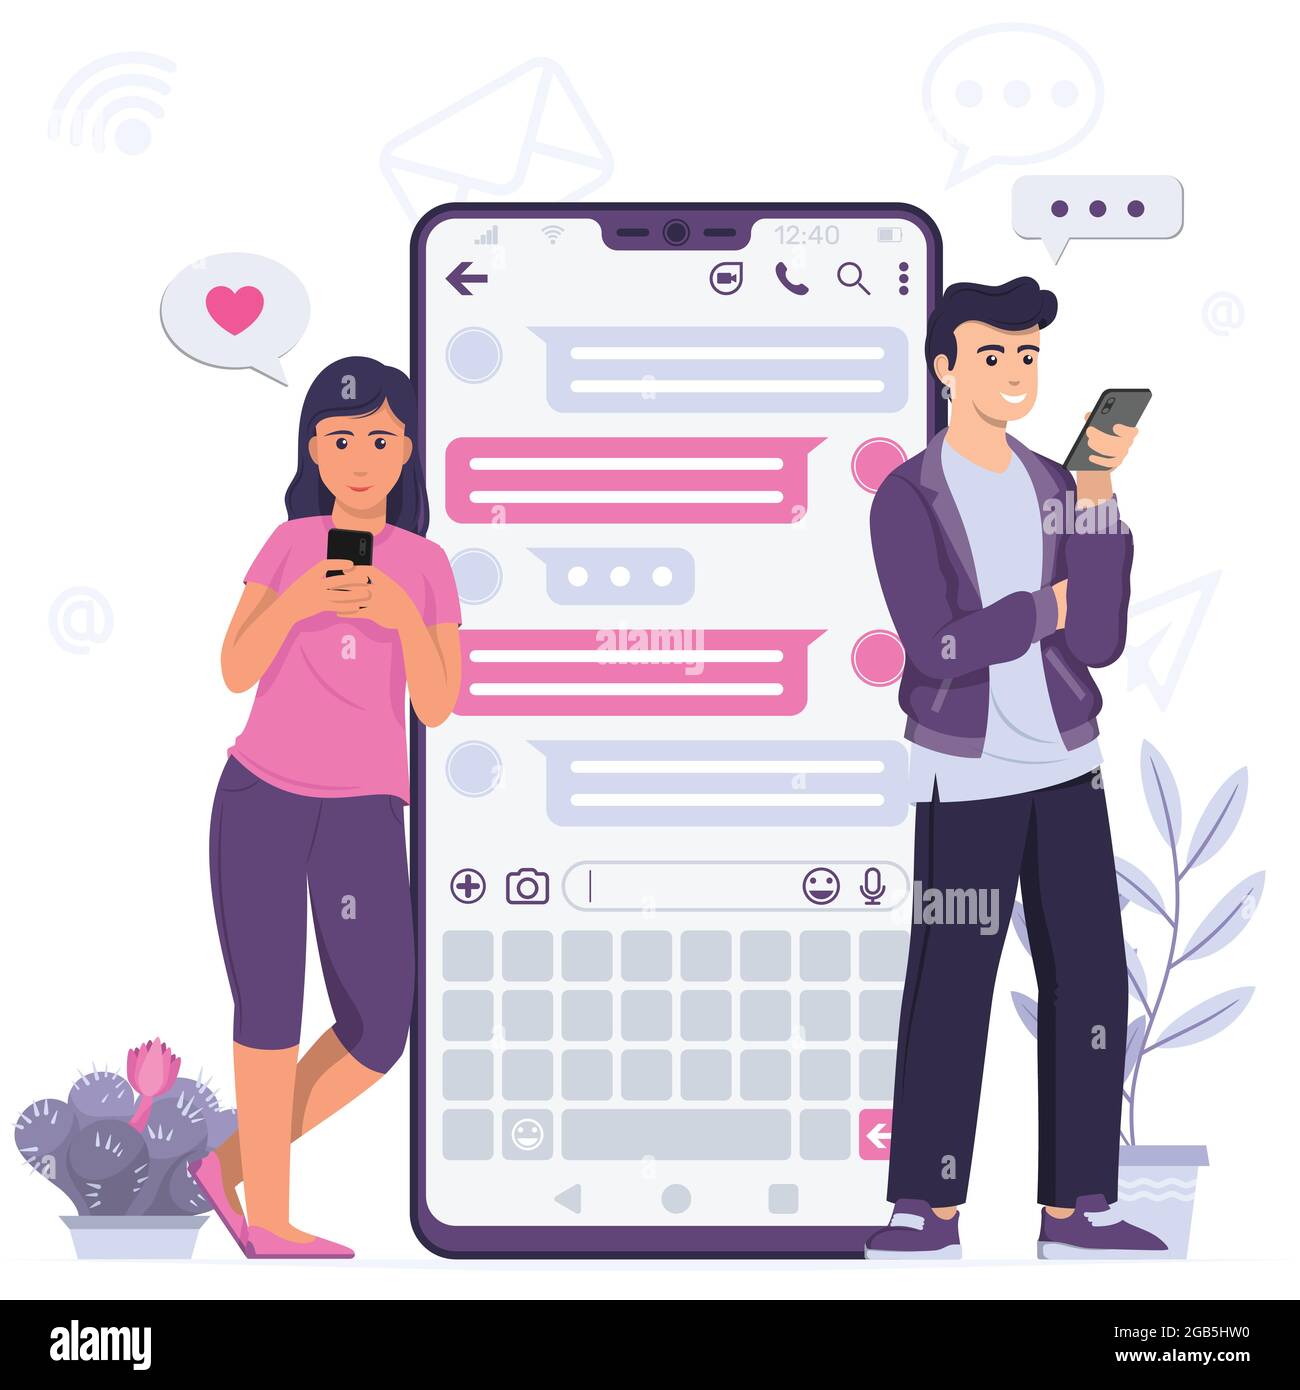 Vector design of girls and boy conversation on mobile, young people conversation with instant messaging application Stock Vector